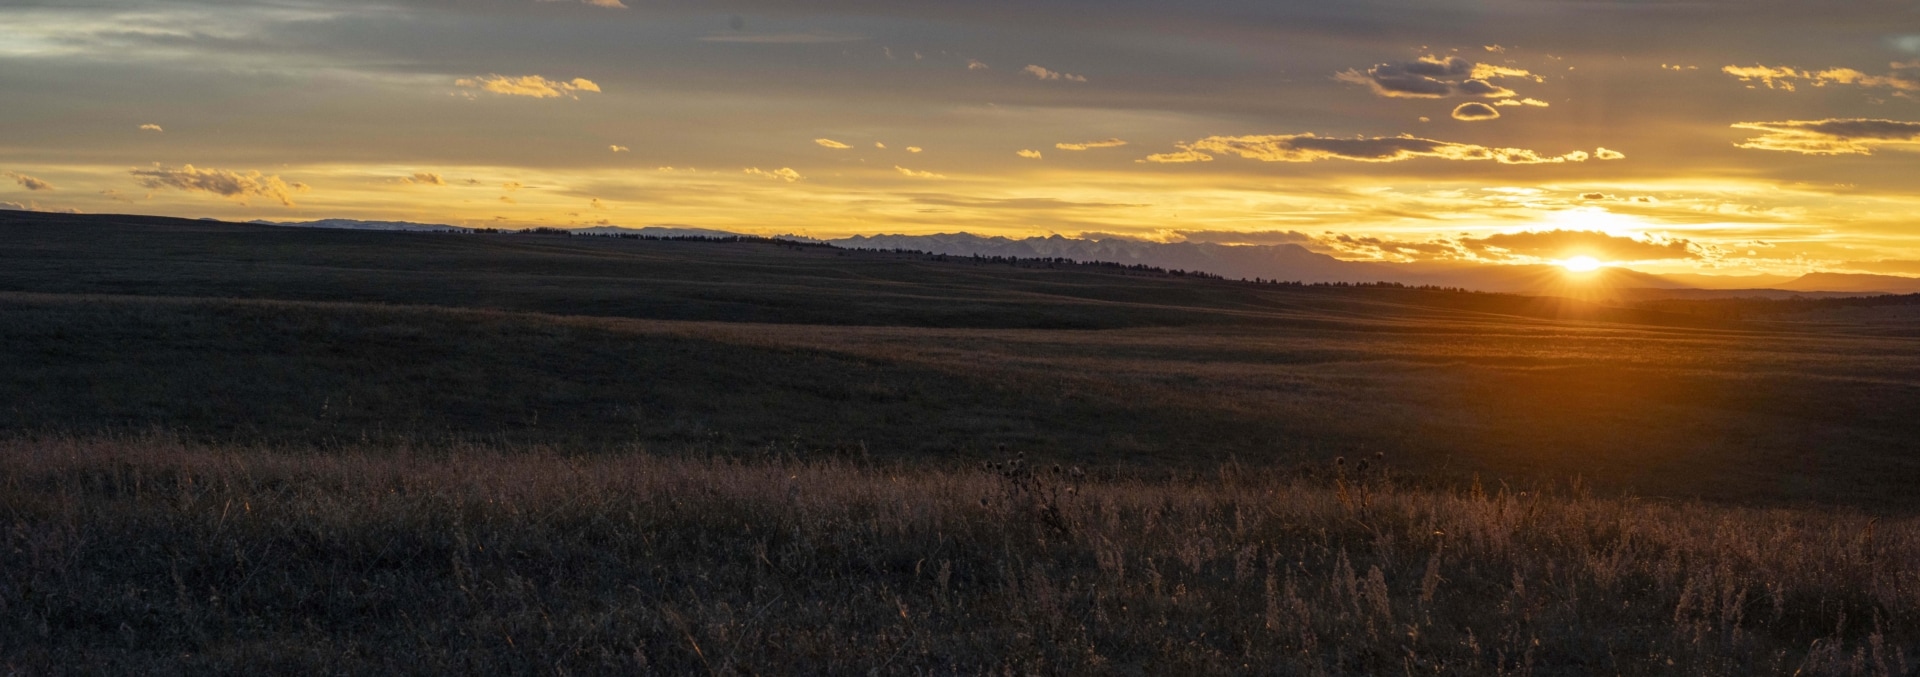 montana cattle ranches for sale struck creek ranch